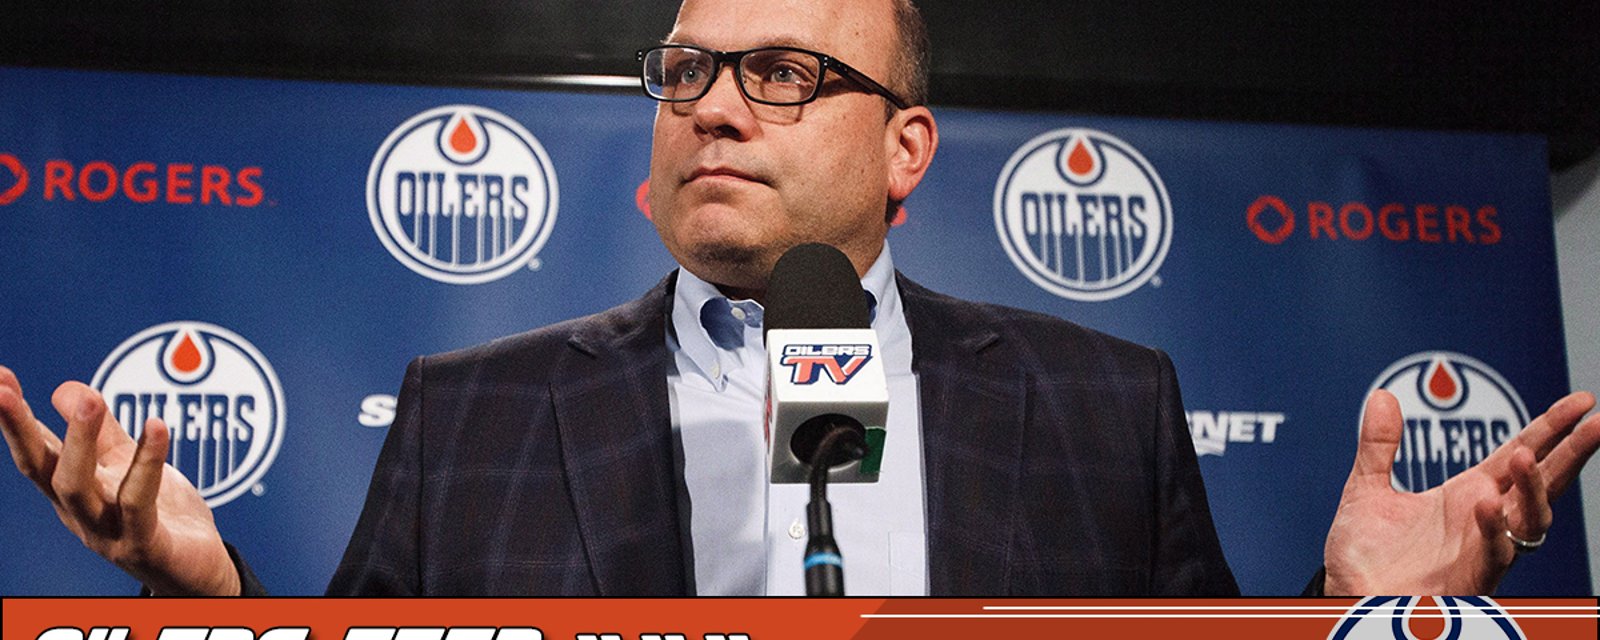 GOTTA SEE IT: Oilers GM loses it after tying goal